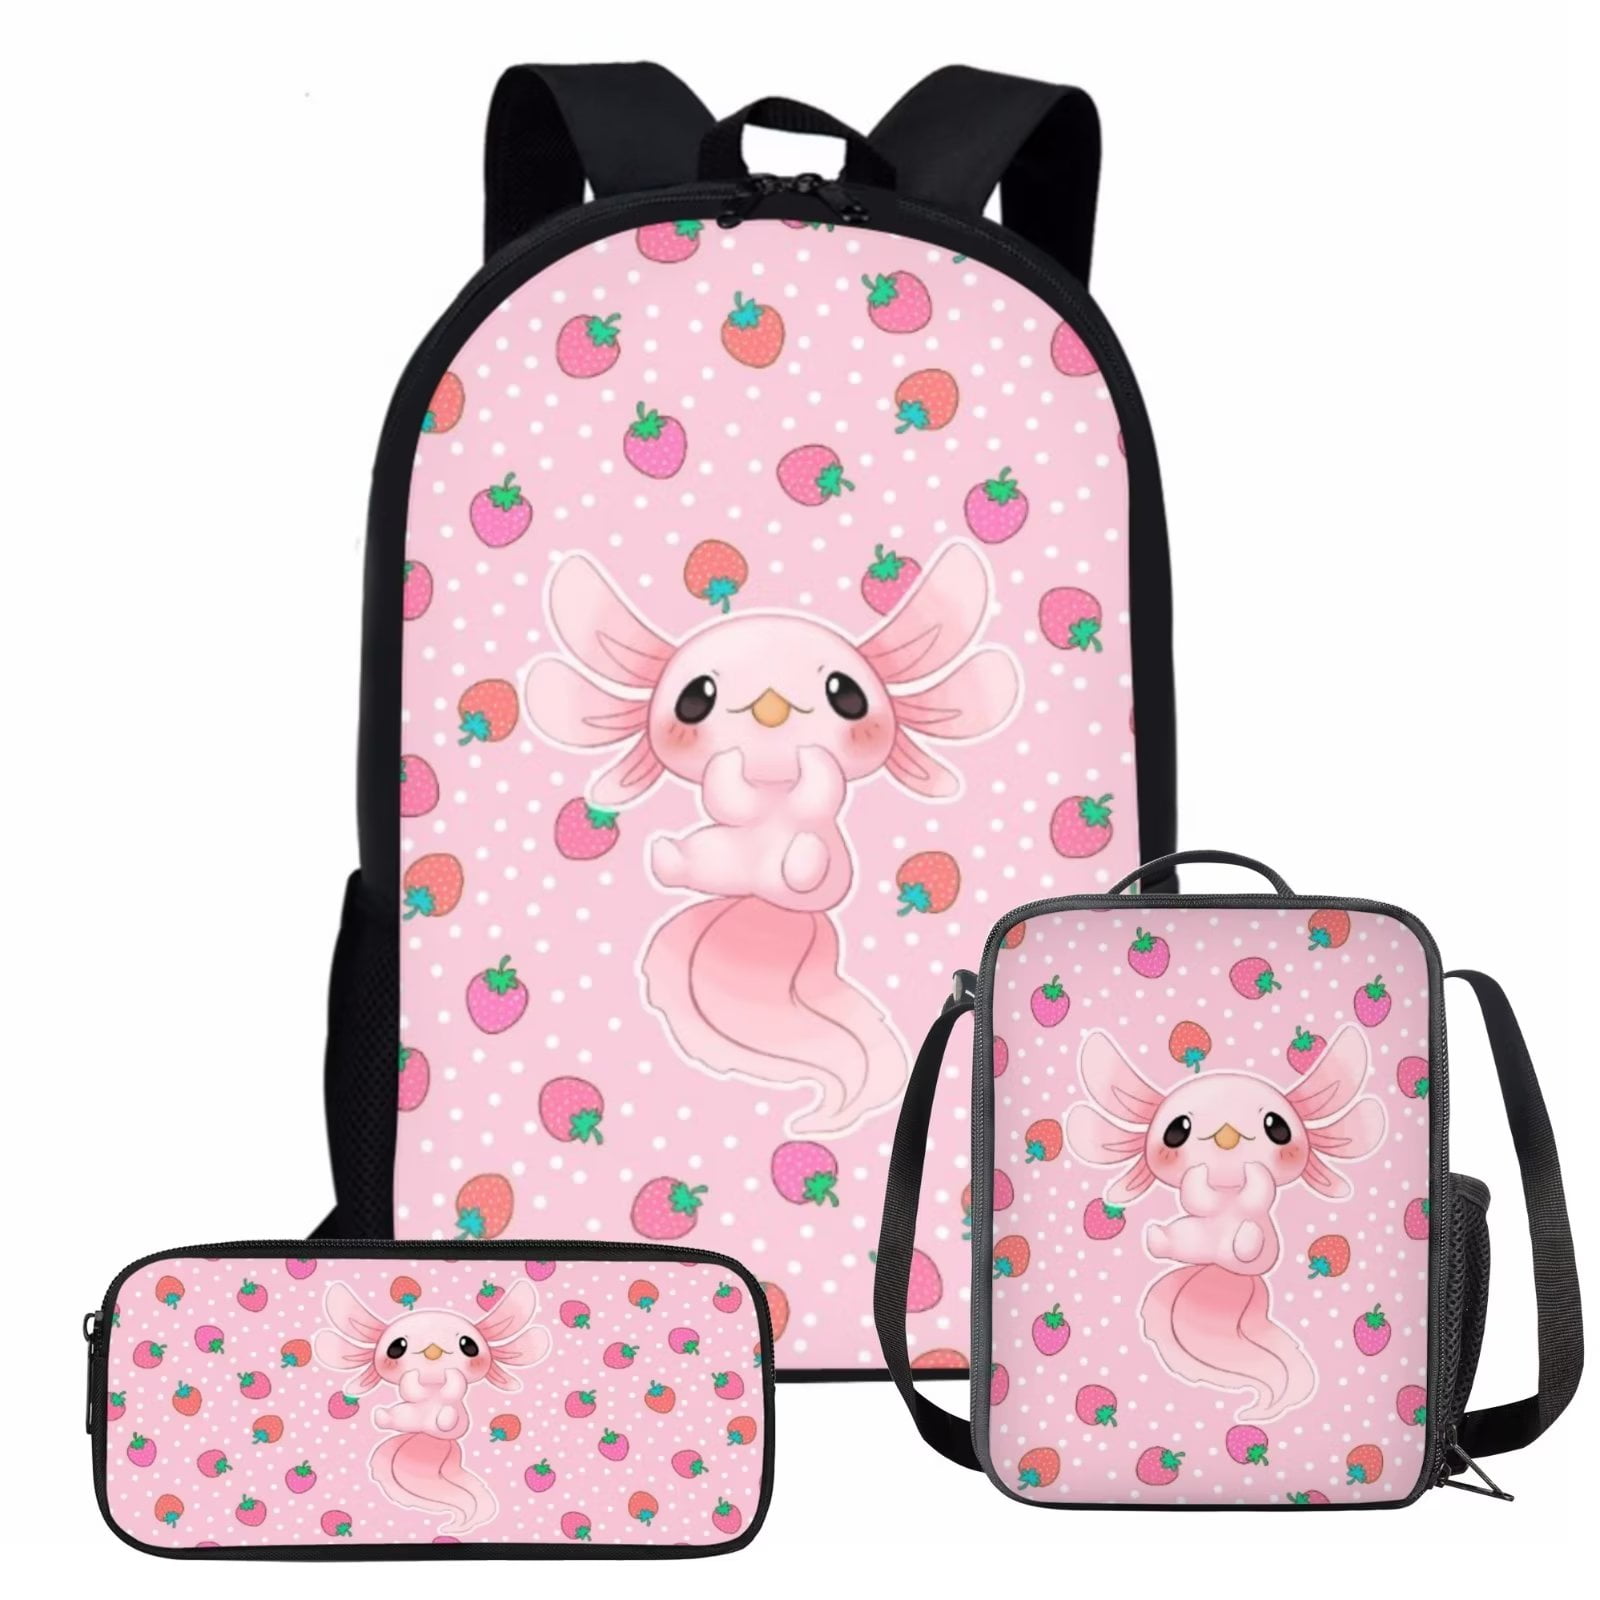 FKELYI Strawberry Axolotl Backpack for Kids Girls Portable Pencil Case  Schoolbag Waterproof Lunch Box Picnic Bagpack with Side Mesh Pockets 3-in-1  